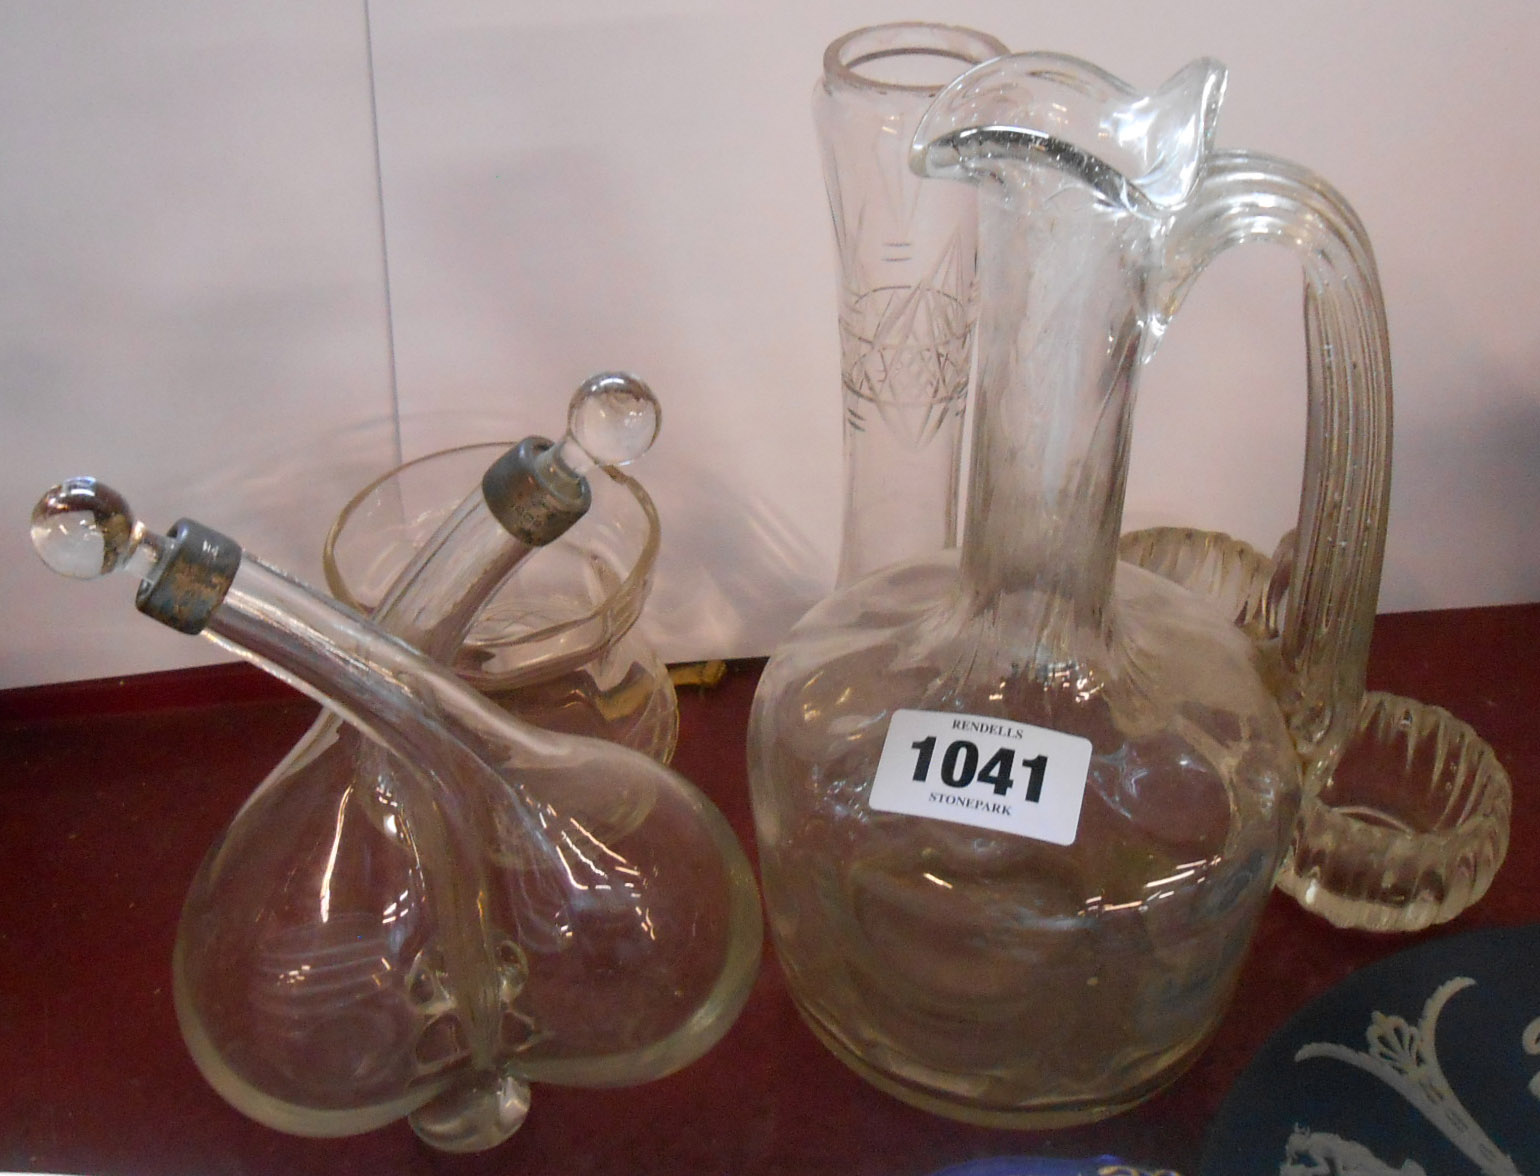 An old glass double pour oil and vinegar bottle with silver collars - sold with a quantity of